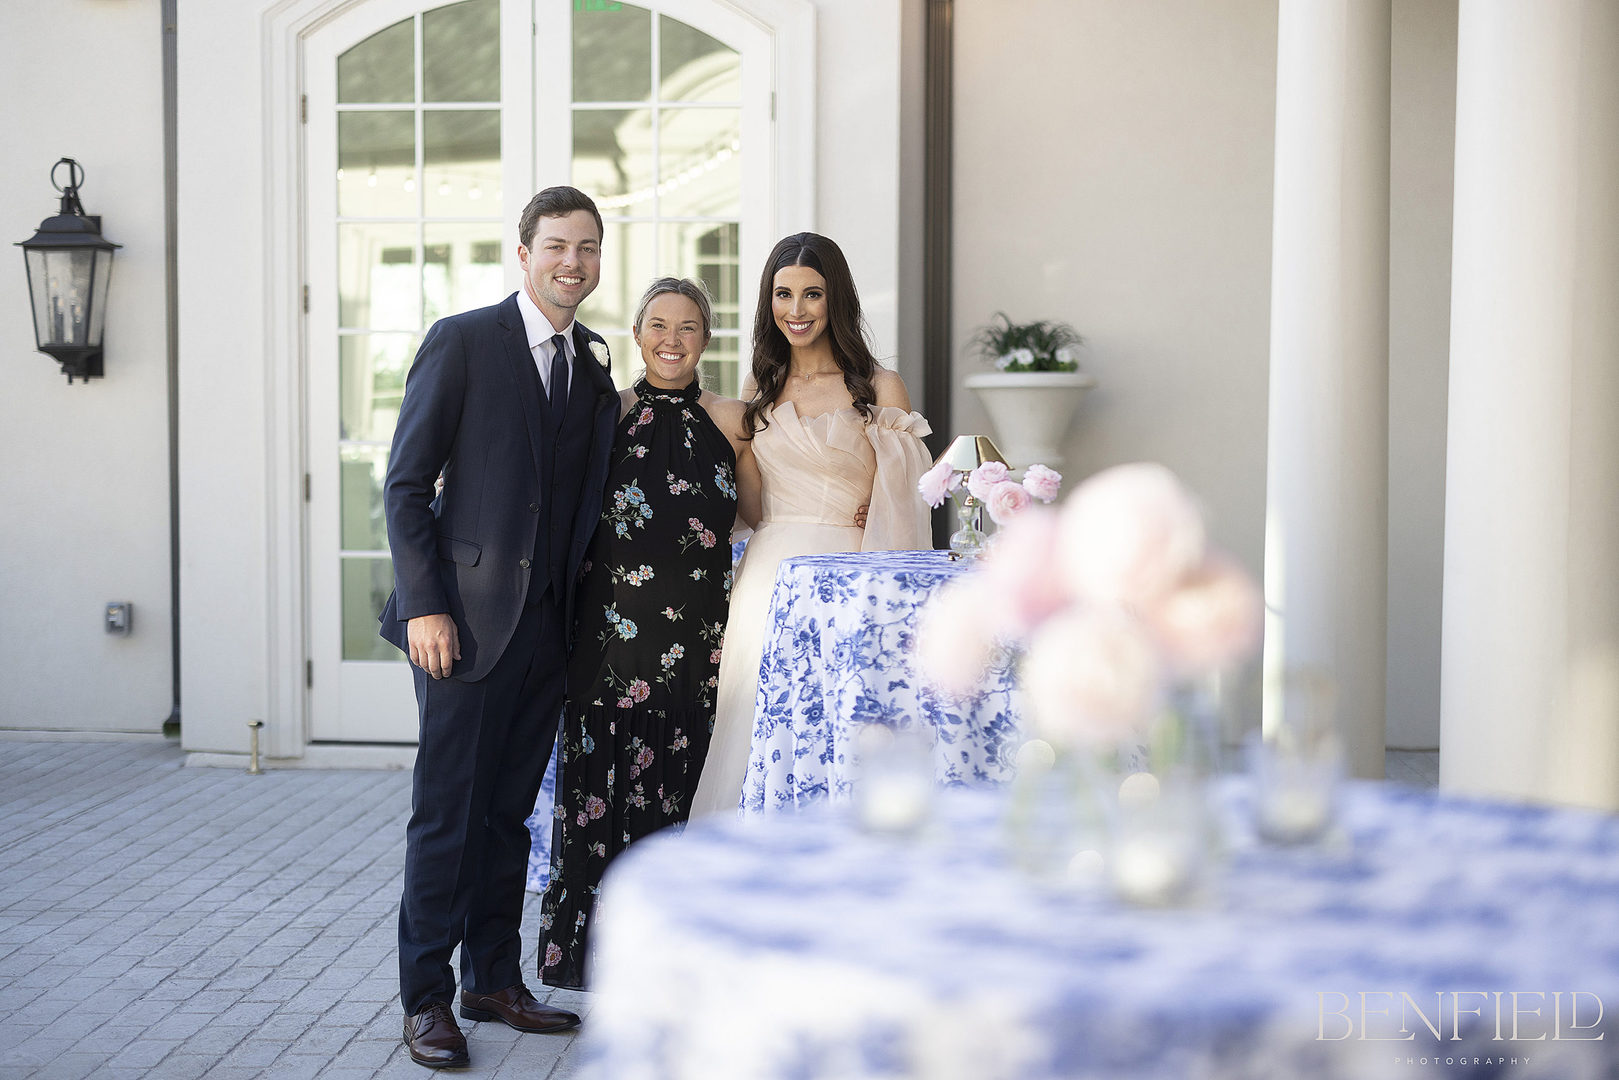 DFW Wedding Vendor Hunter Orcutt stands with the bride and groom at Hillside Estate on their wedding day.